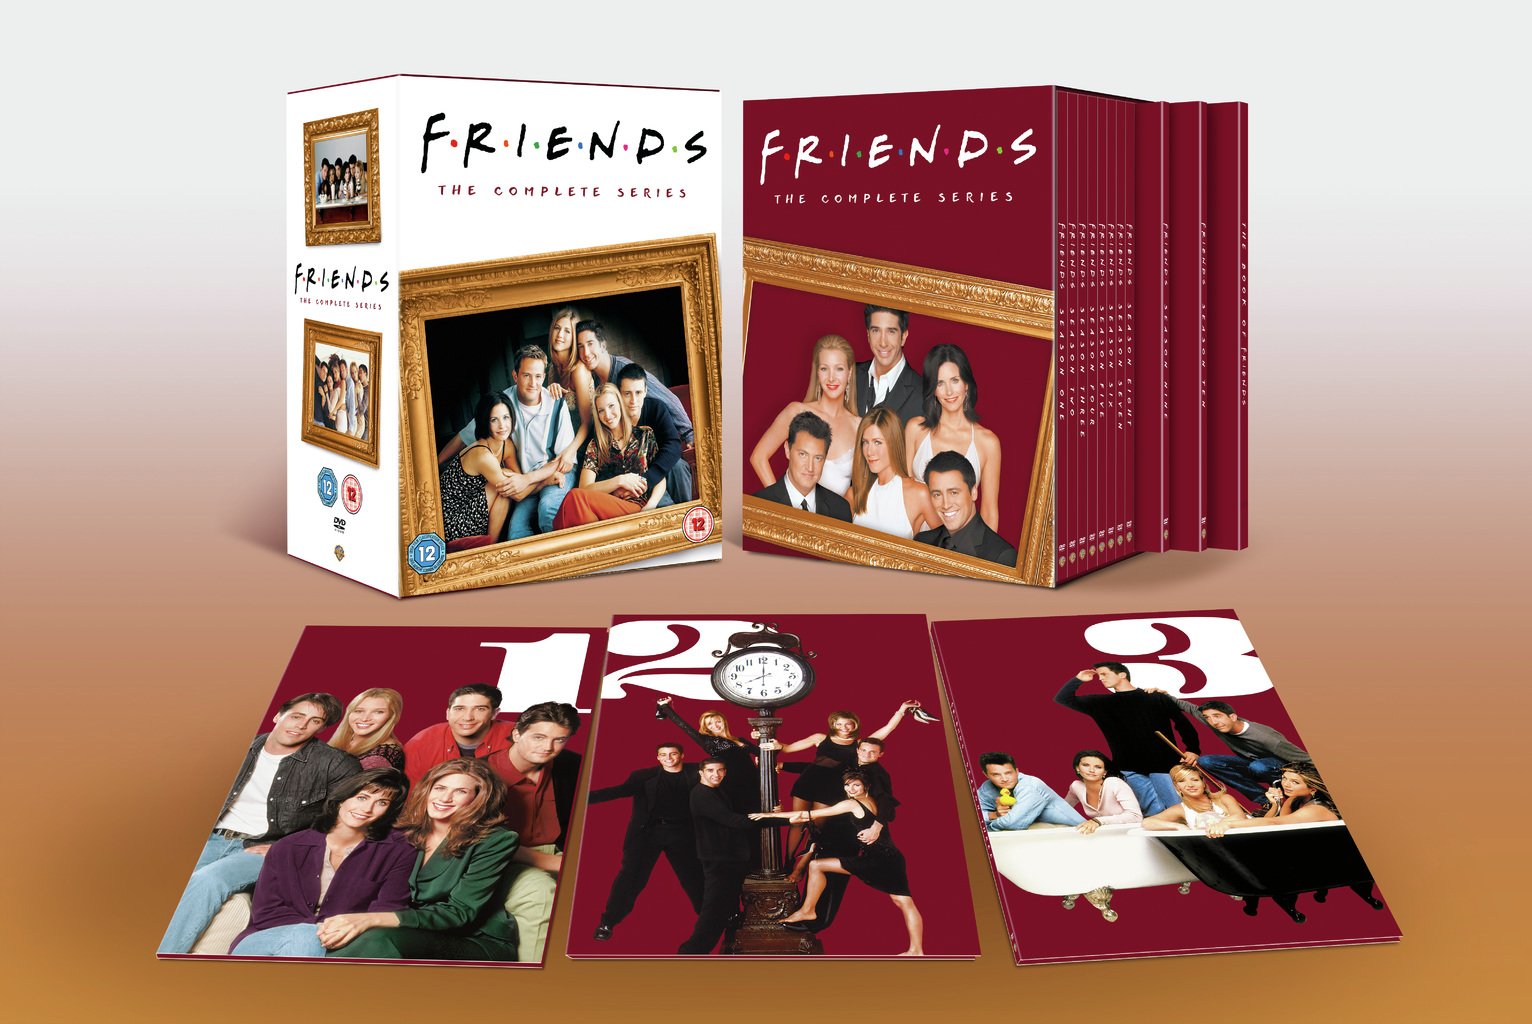 Friends The Complete Series Seasons 1-10 DVD Box Set Review